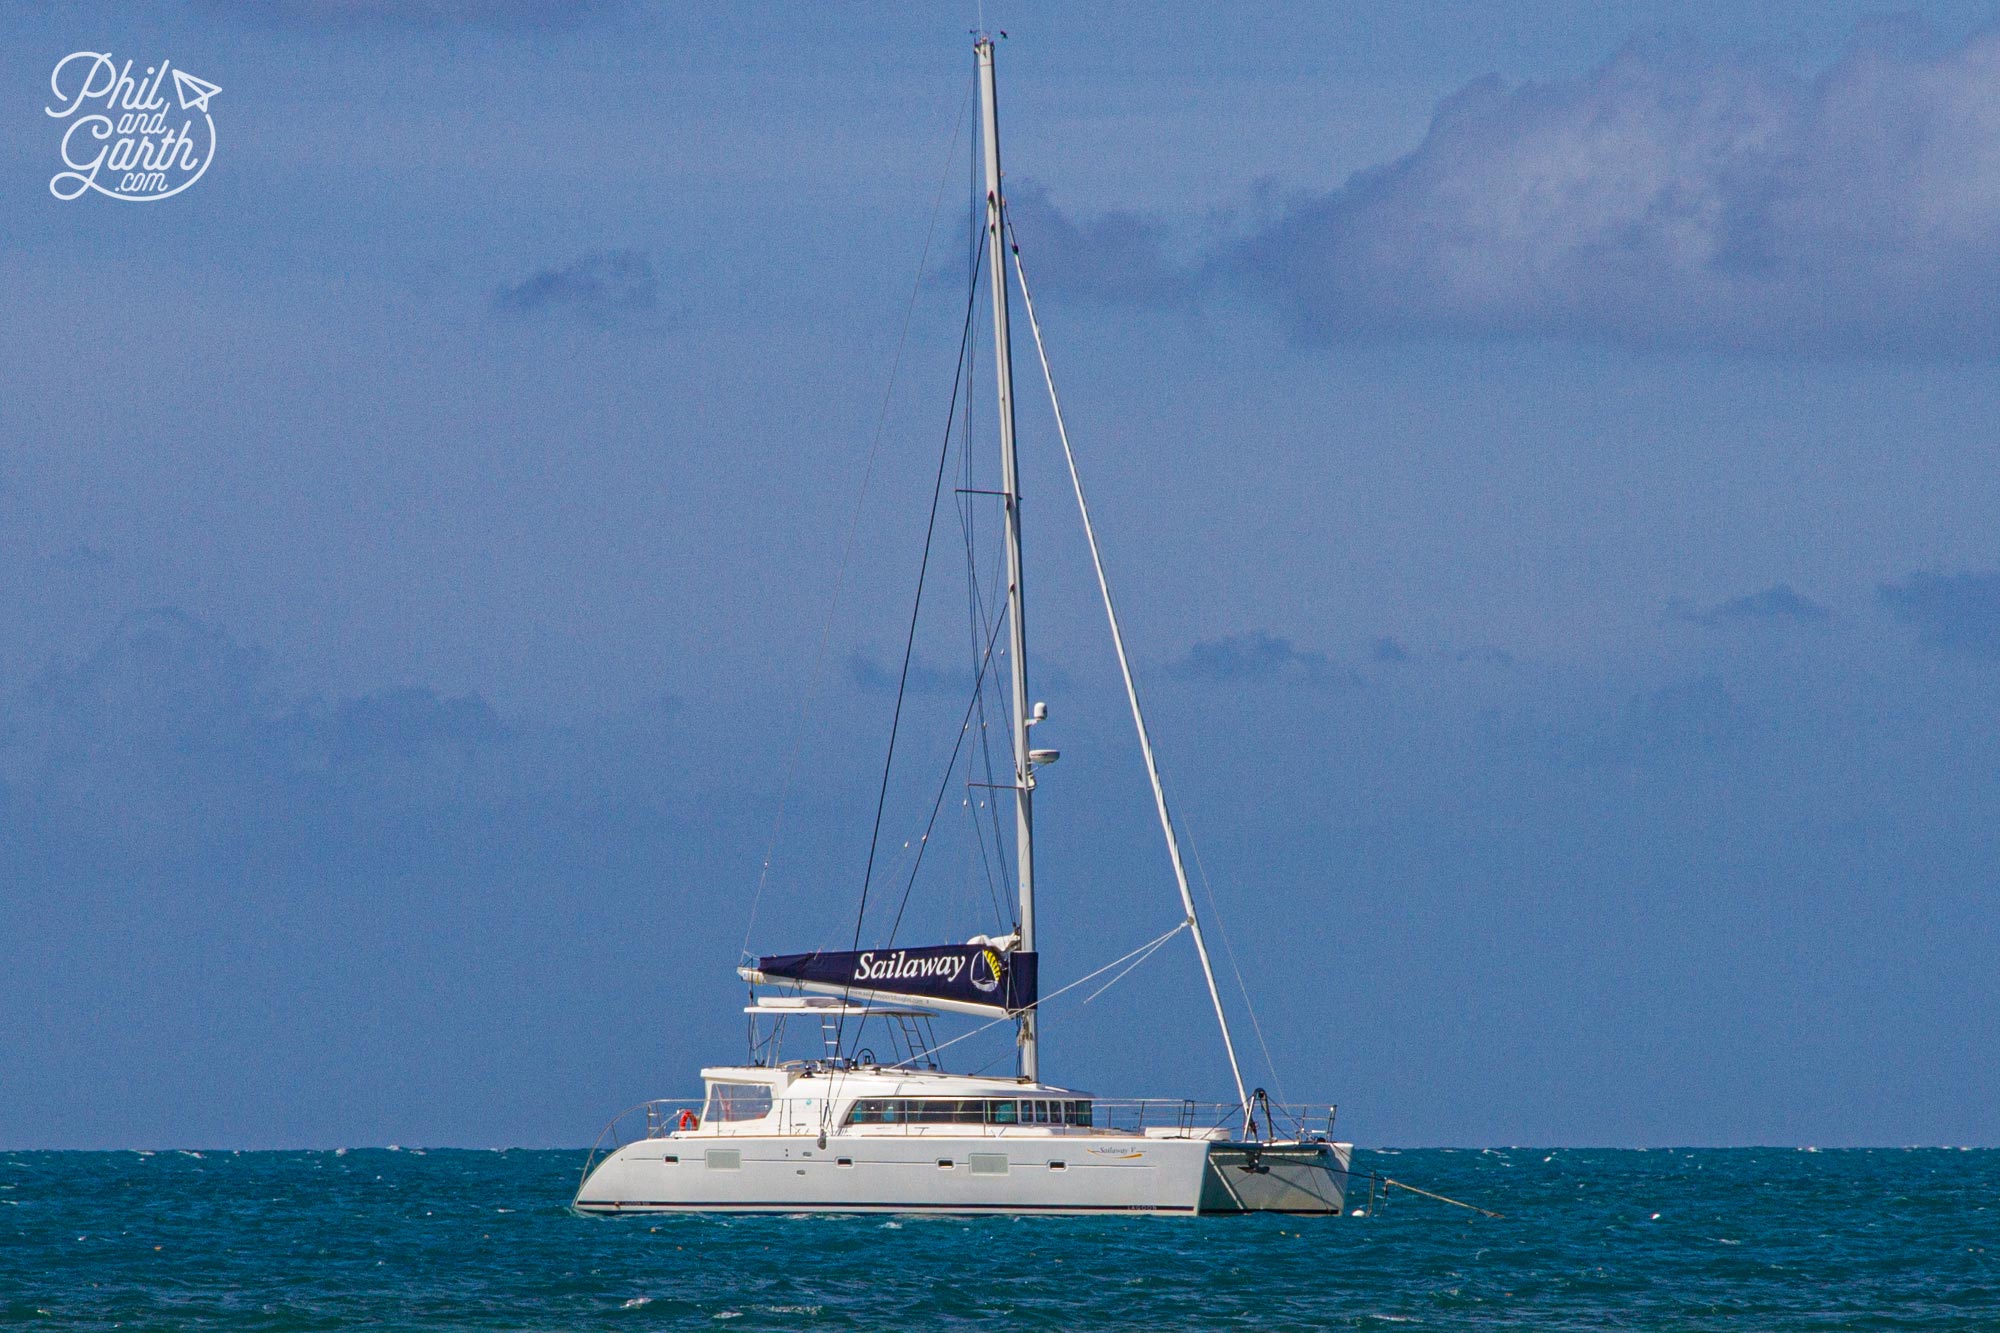 Our luxury catamaran sailing to the Low Isles